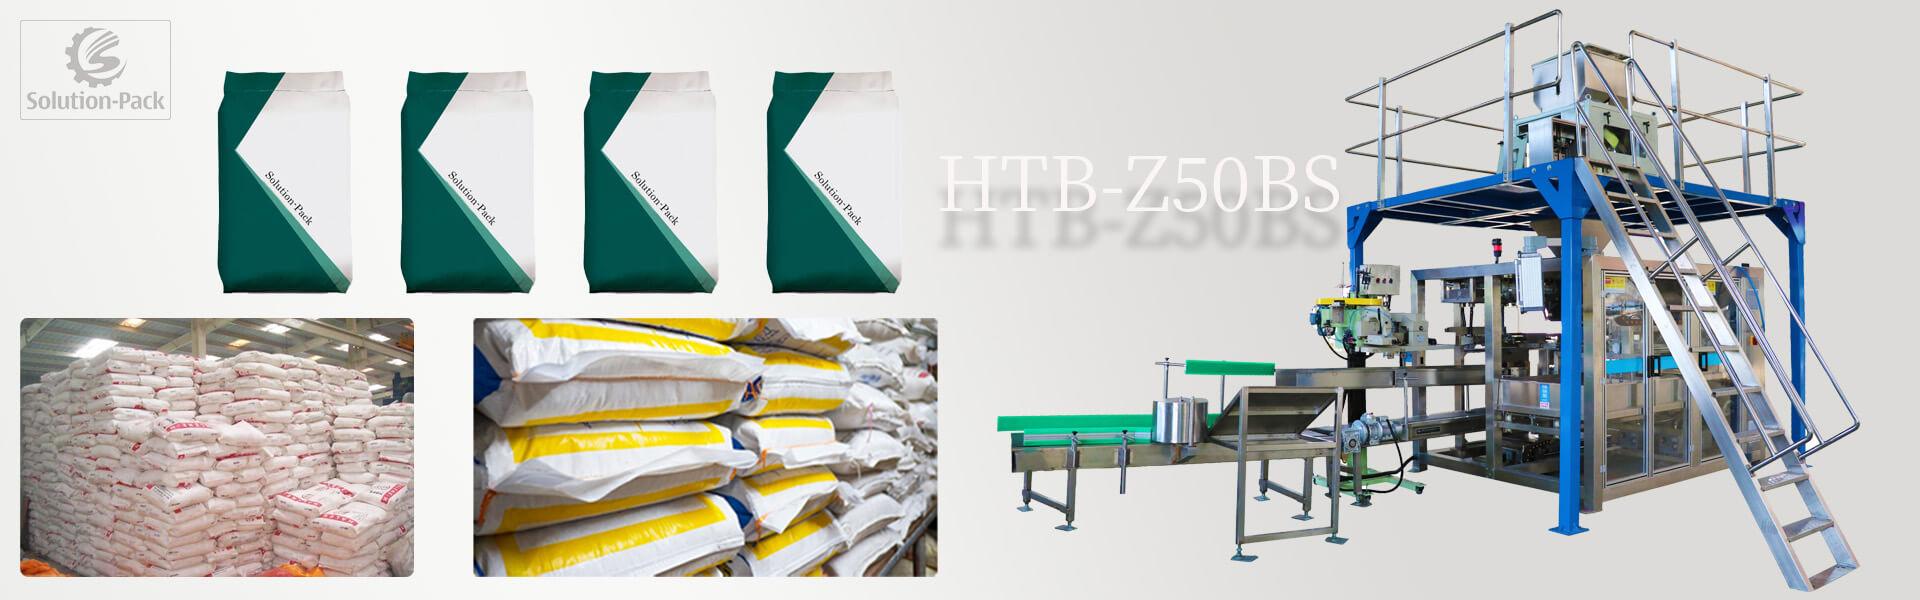 HTB-Z50BS Automatic Weighing Bagging Machine Unit Heading Banner Picture| Auto Bagging Sewing Machine | Auto Bagging Stitching Machine | Solution-Pack | Industrial Packaging Solutions